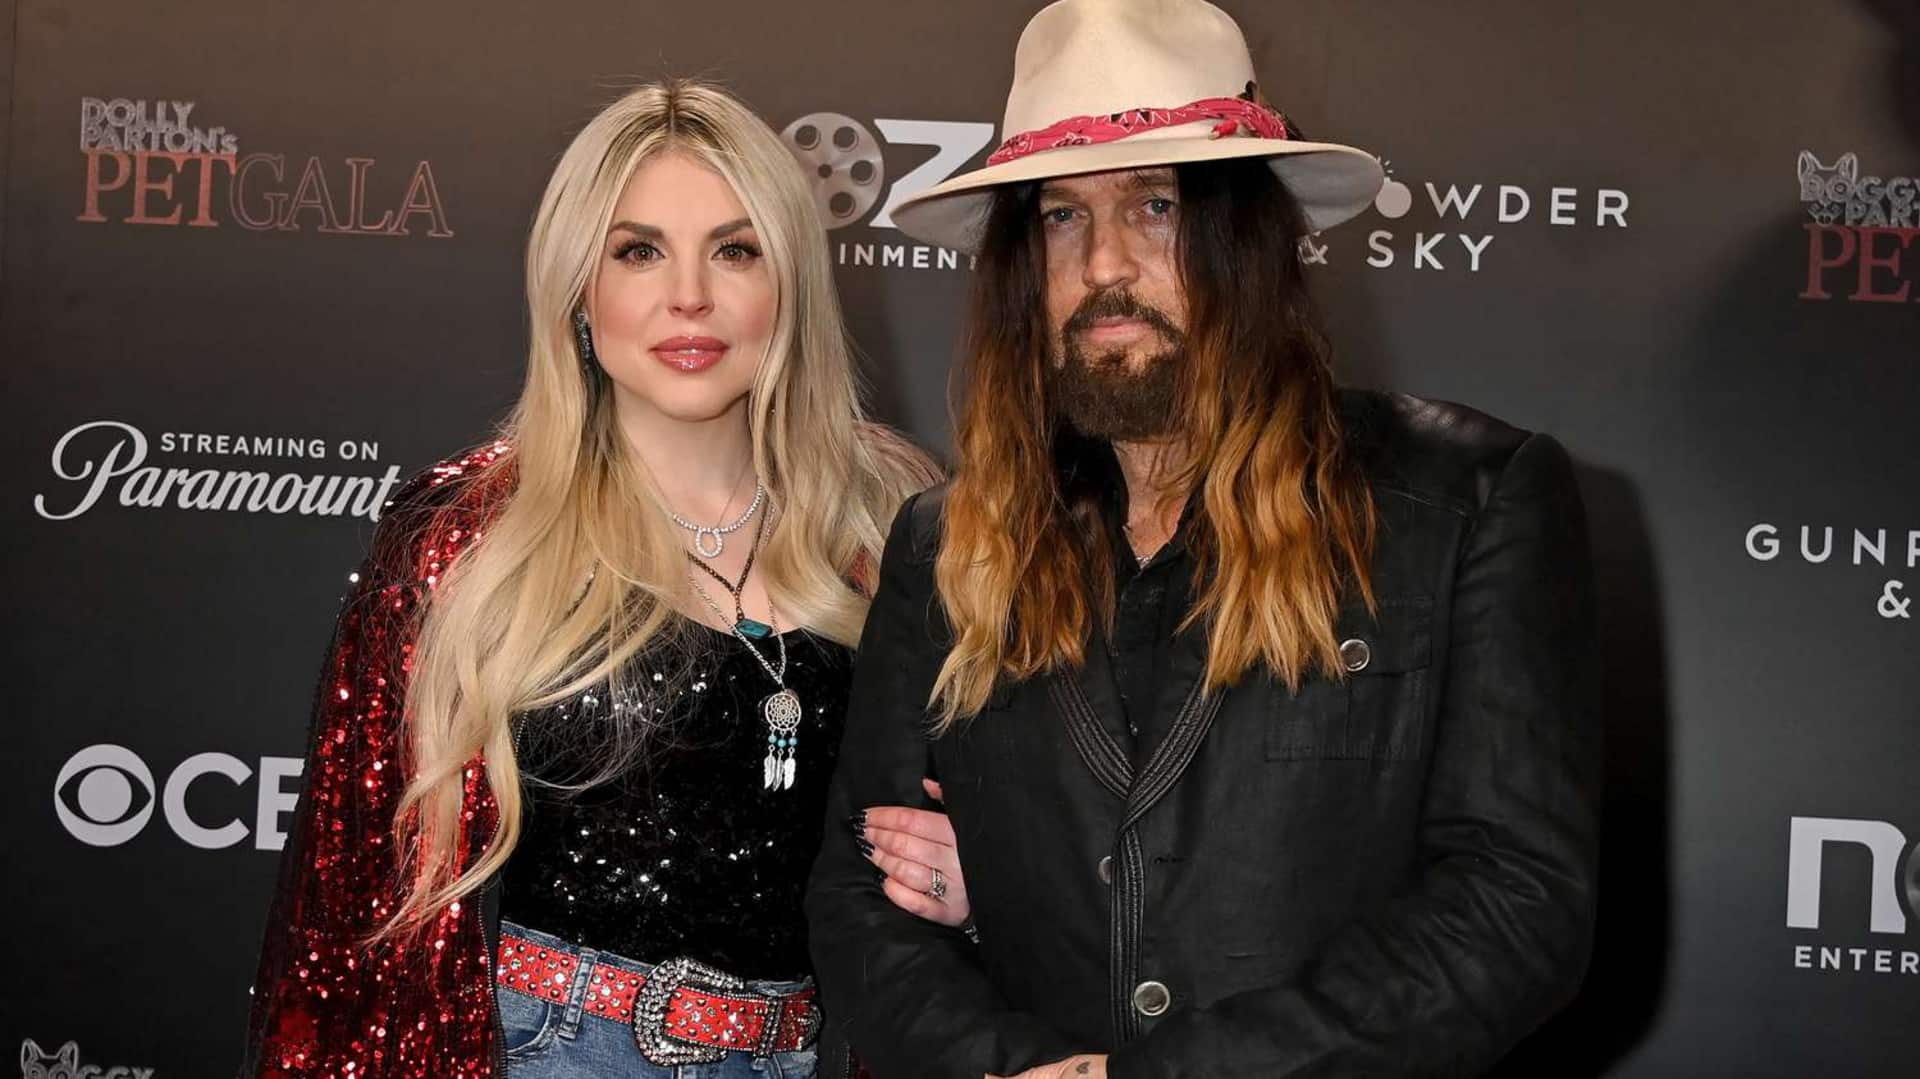 Billy Cyrus's ex-wife levels abuse, manipulation allegations against him